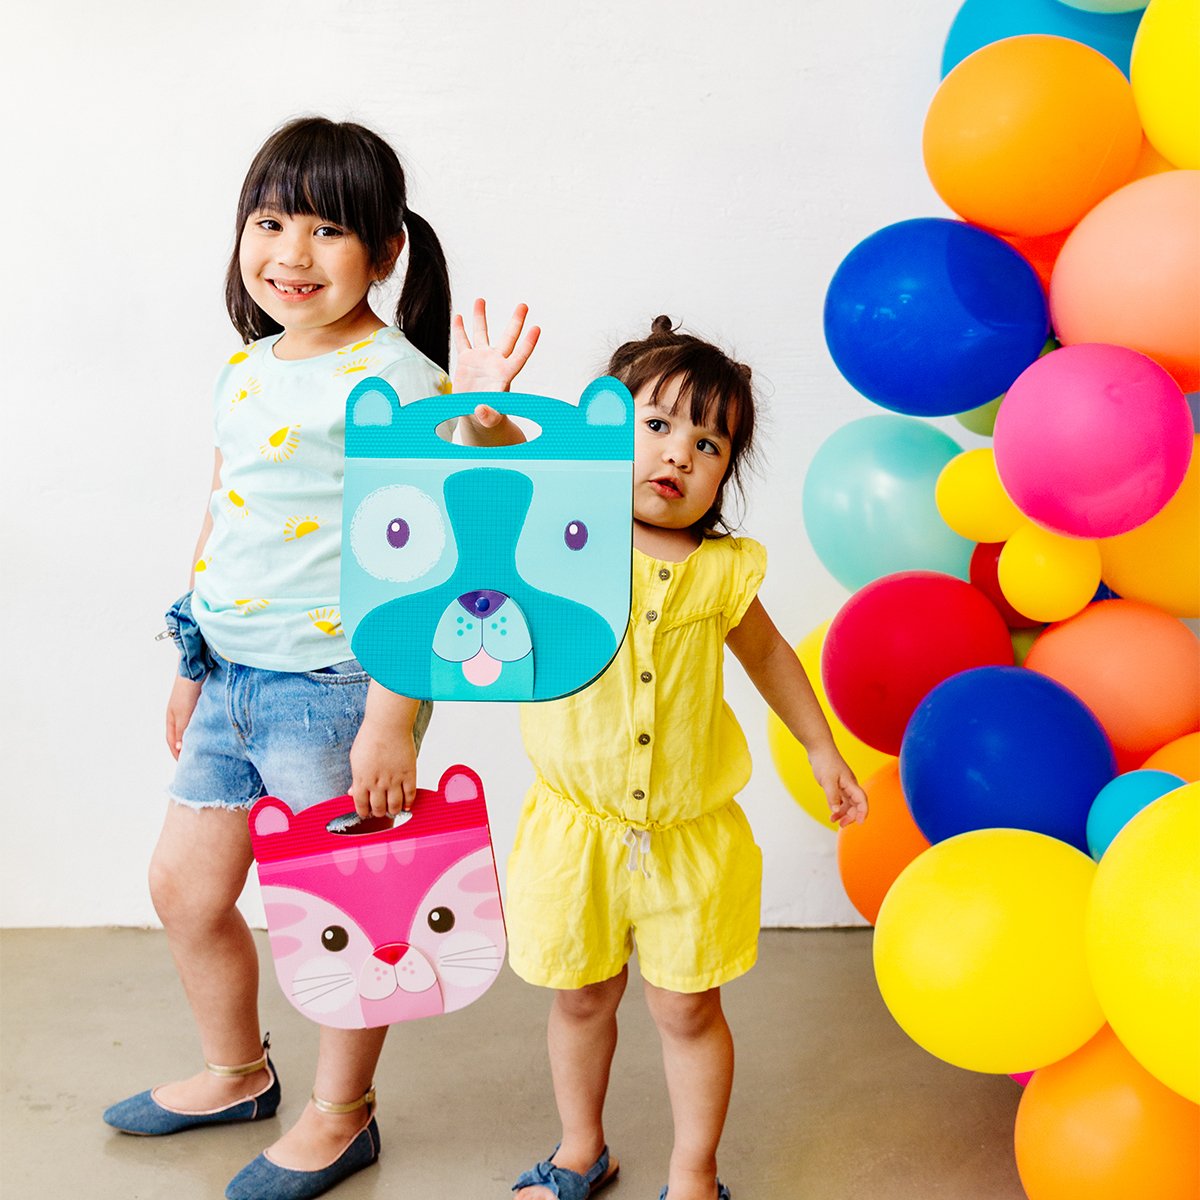 Happy girls holding dog and cat Carry Along Sketchbooks next to colorful balloons